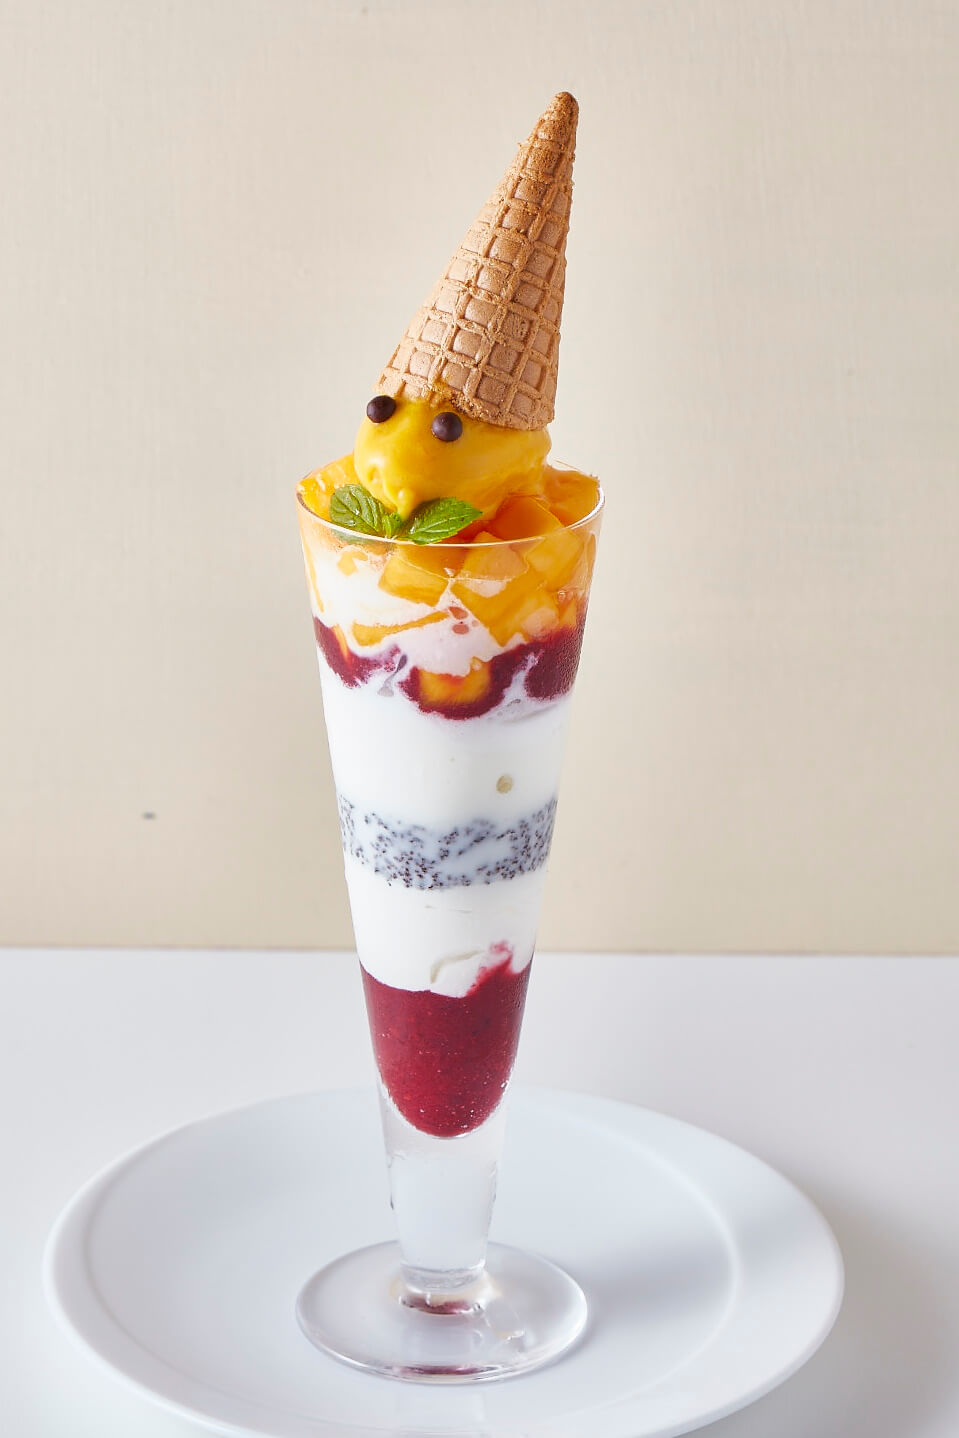 Delicious Desserts Fair to be Held at 21 Cafés & Restaurants in Roppongi Hills